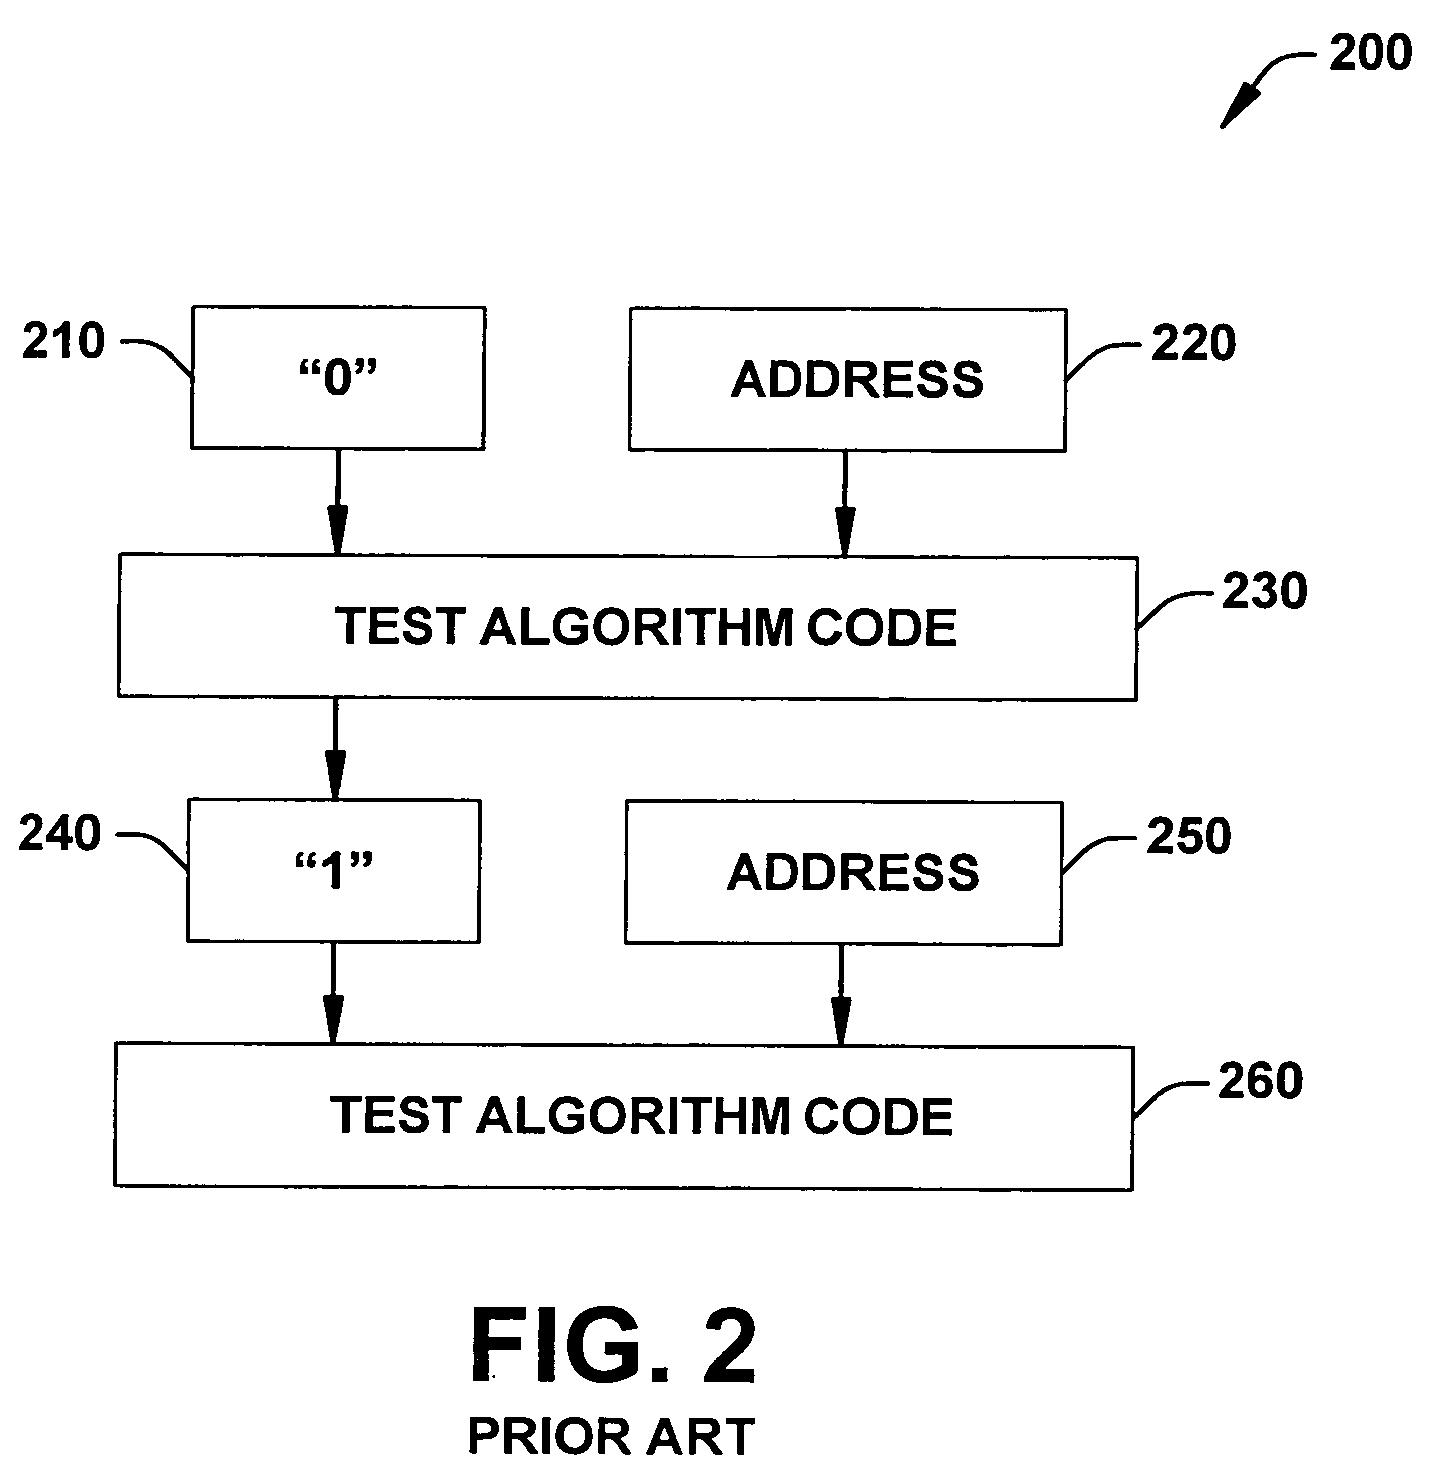 Method for reducing SRAM test time by applying power-up state knowledge